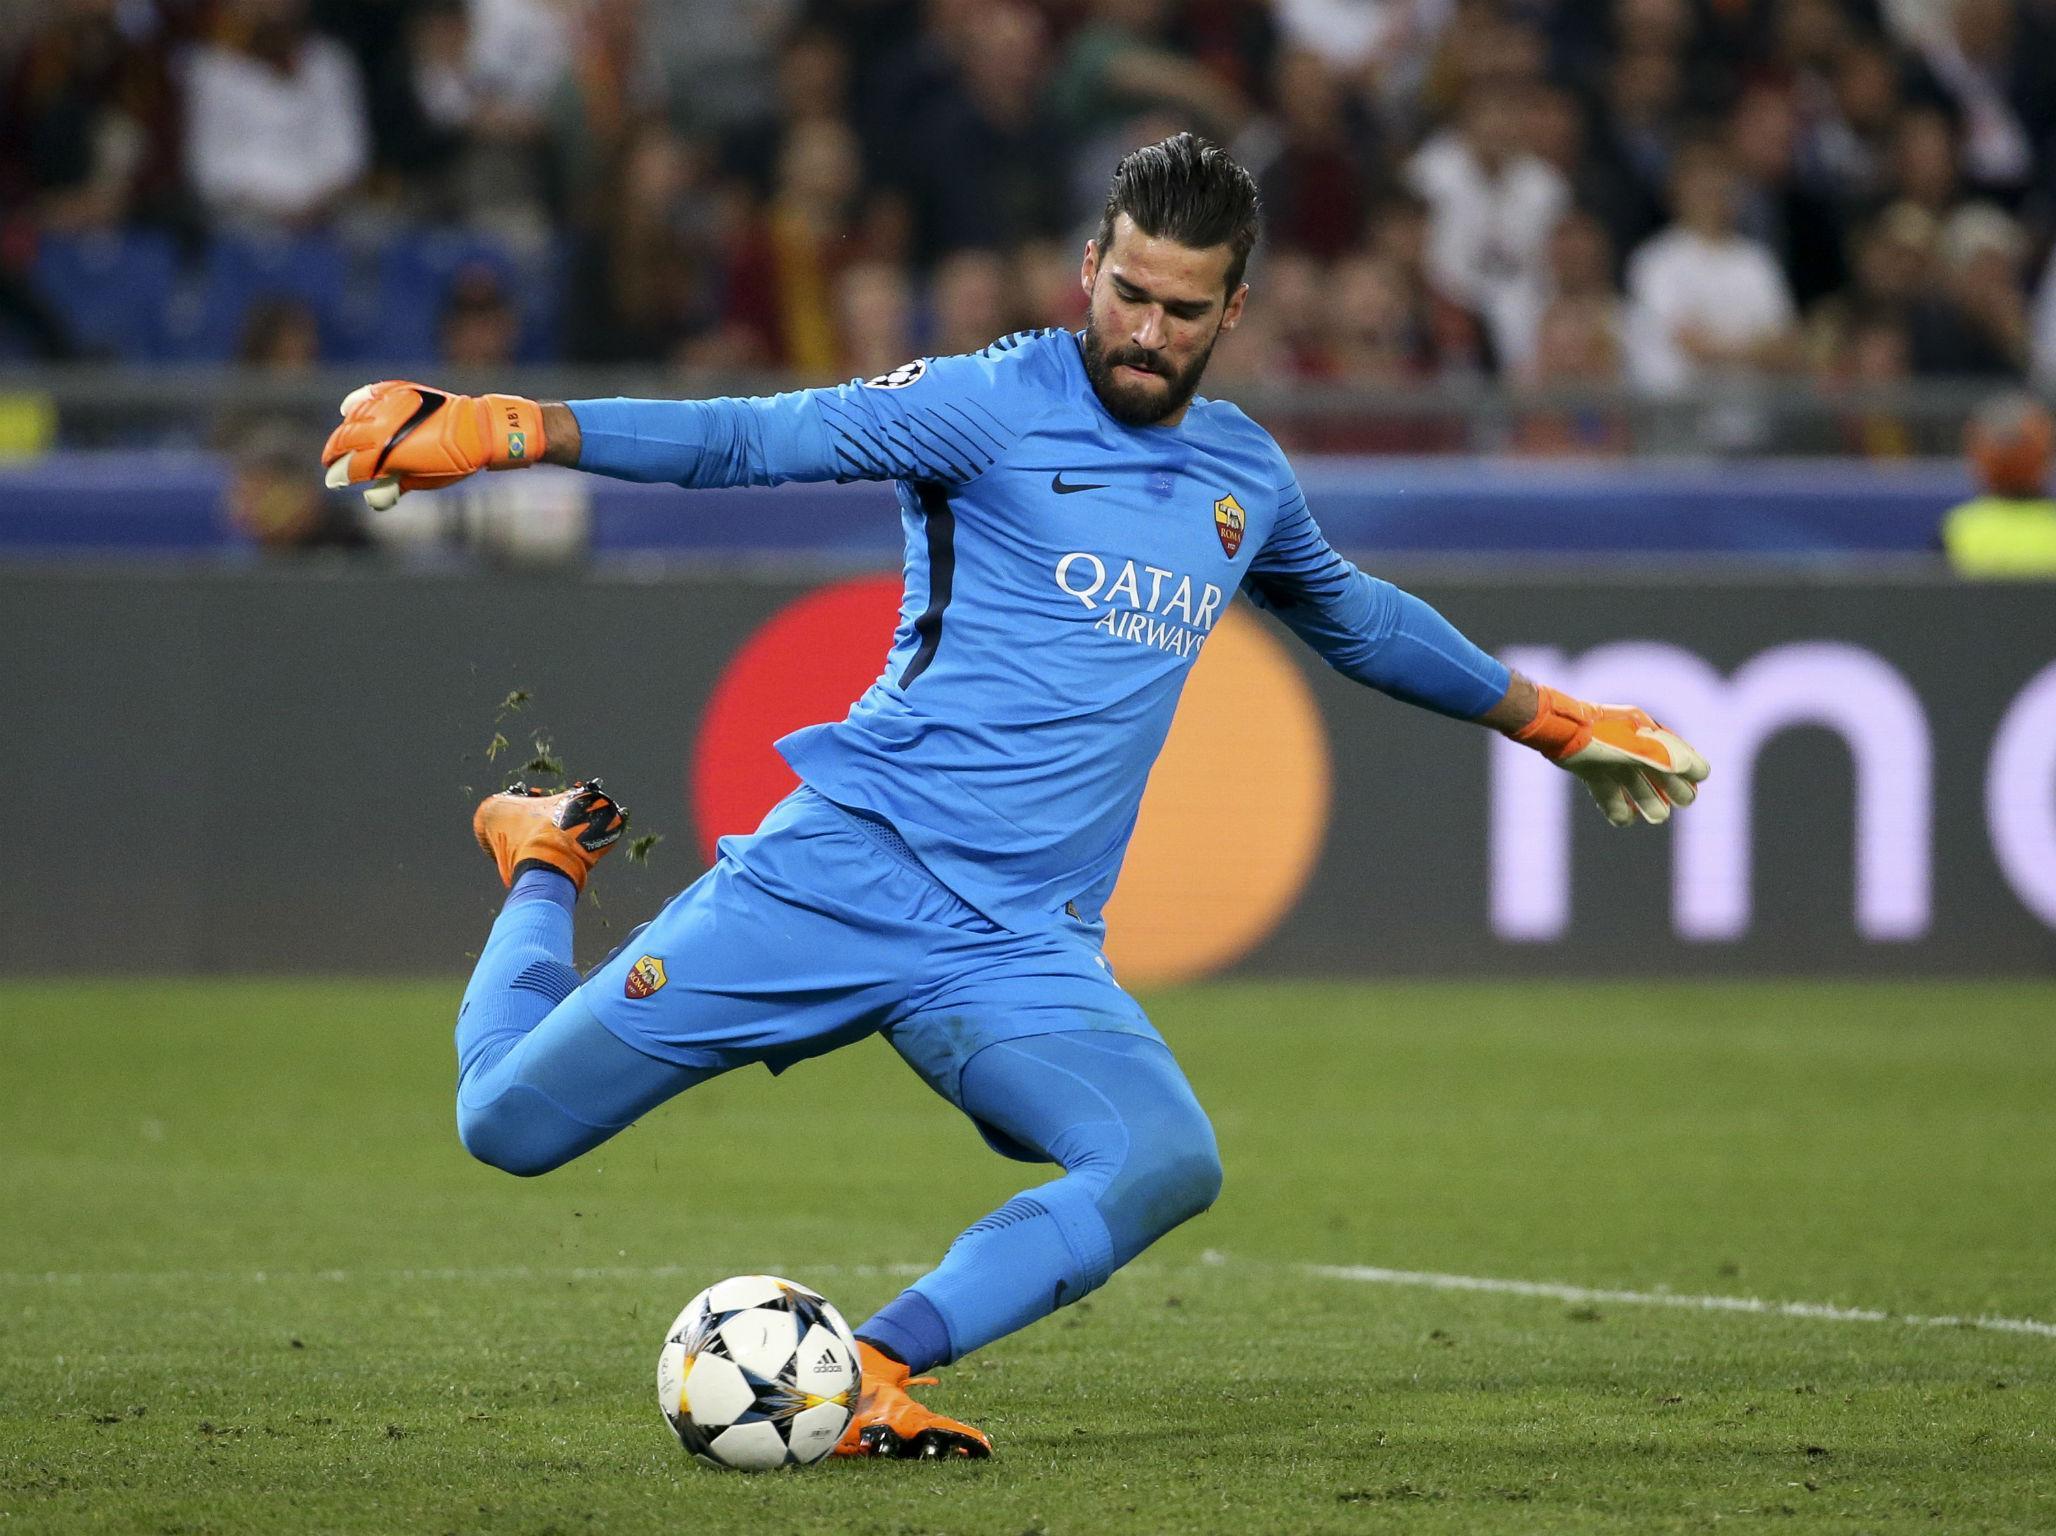 Liverpool are set to end their pursuit of Roma goalkeeper Alisson